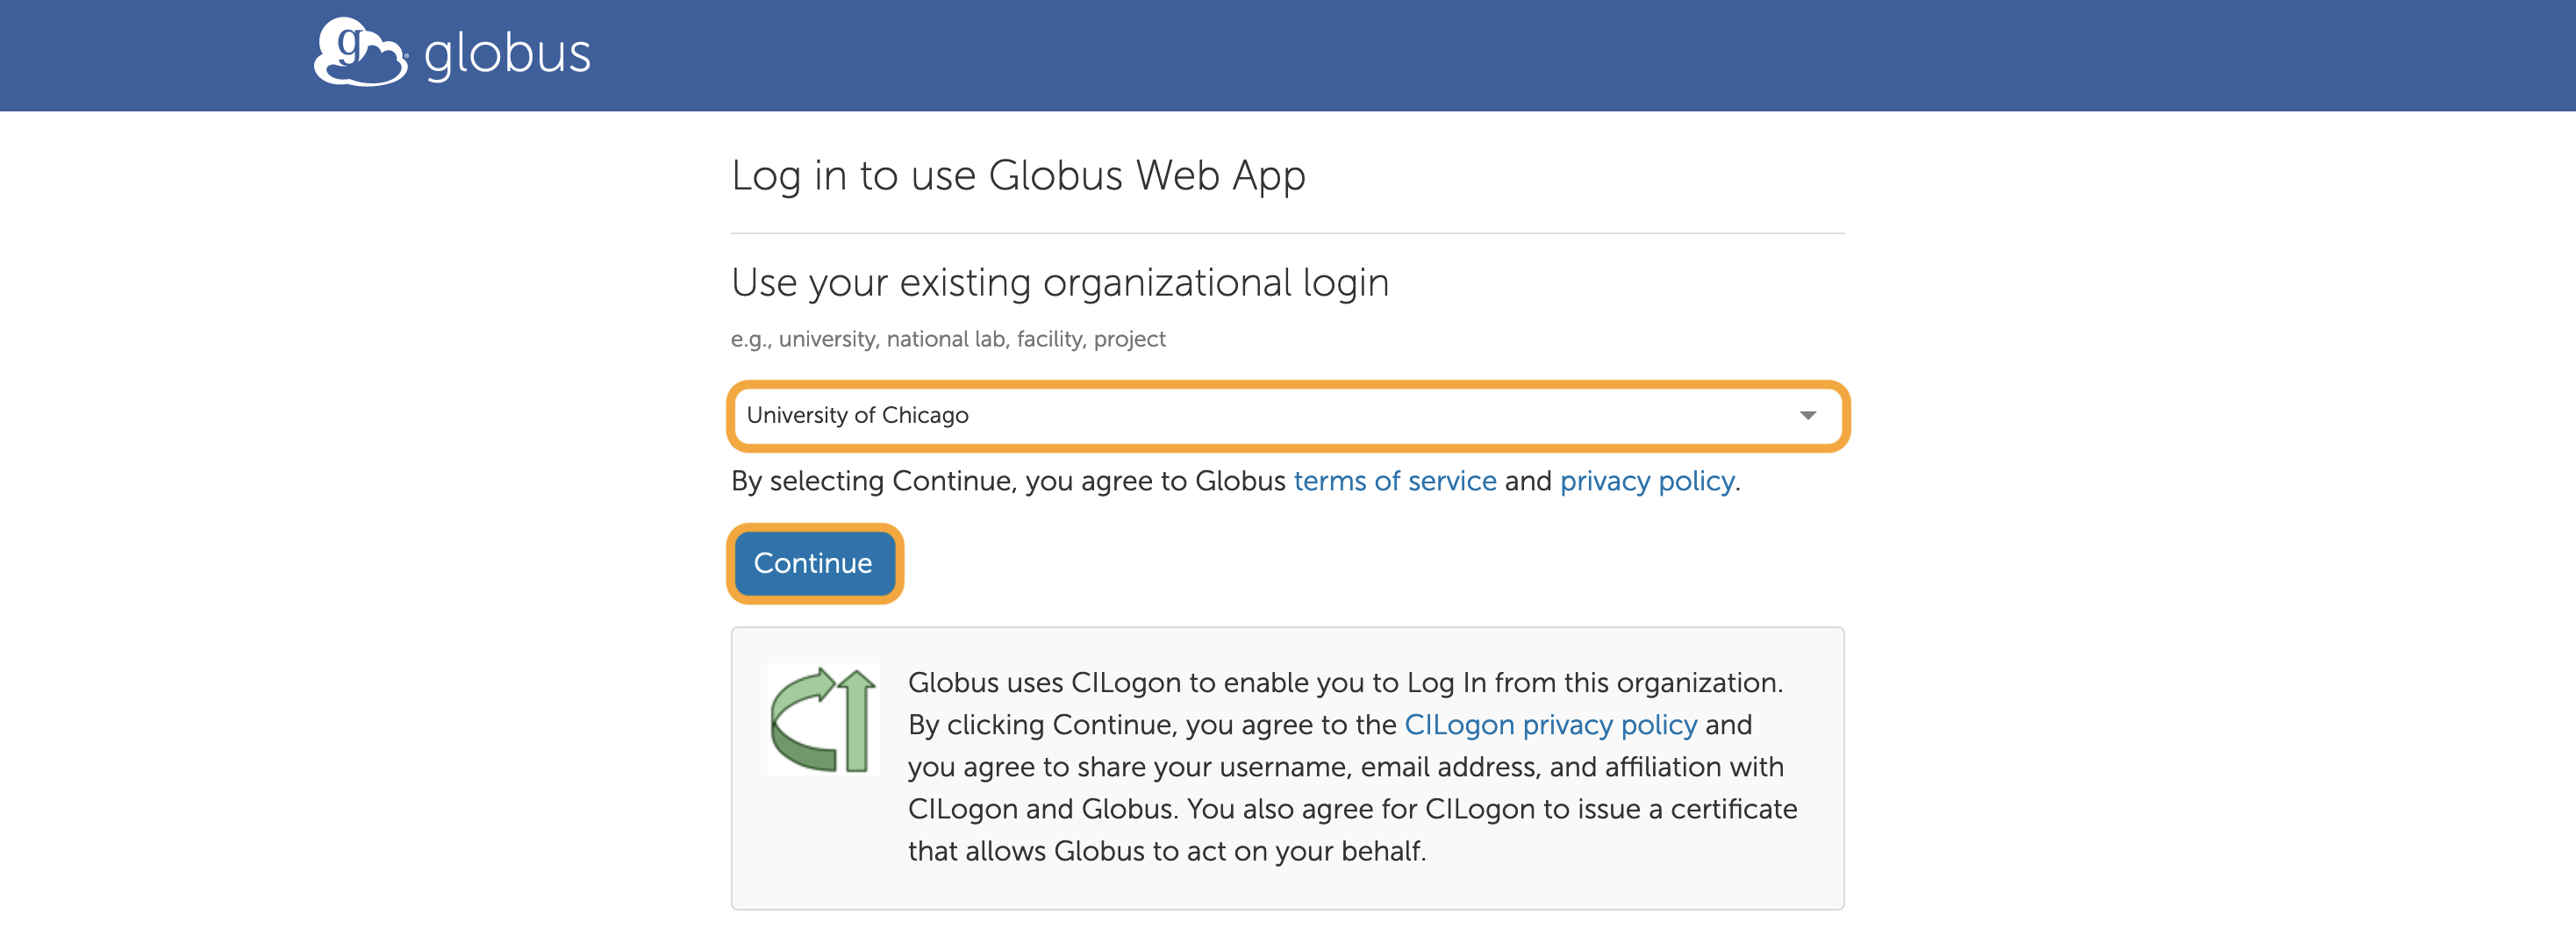 Globus Web App home page with "University of Chicago" selected from the existing organizational login menu and the Continue button highlighted.